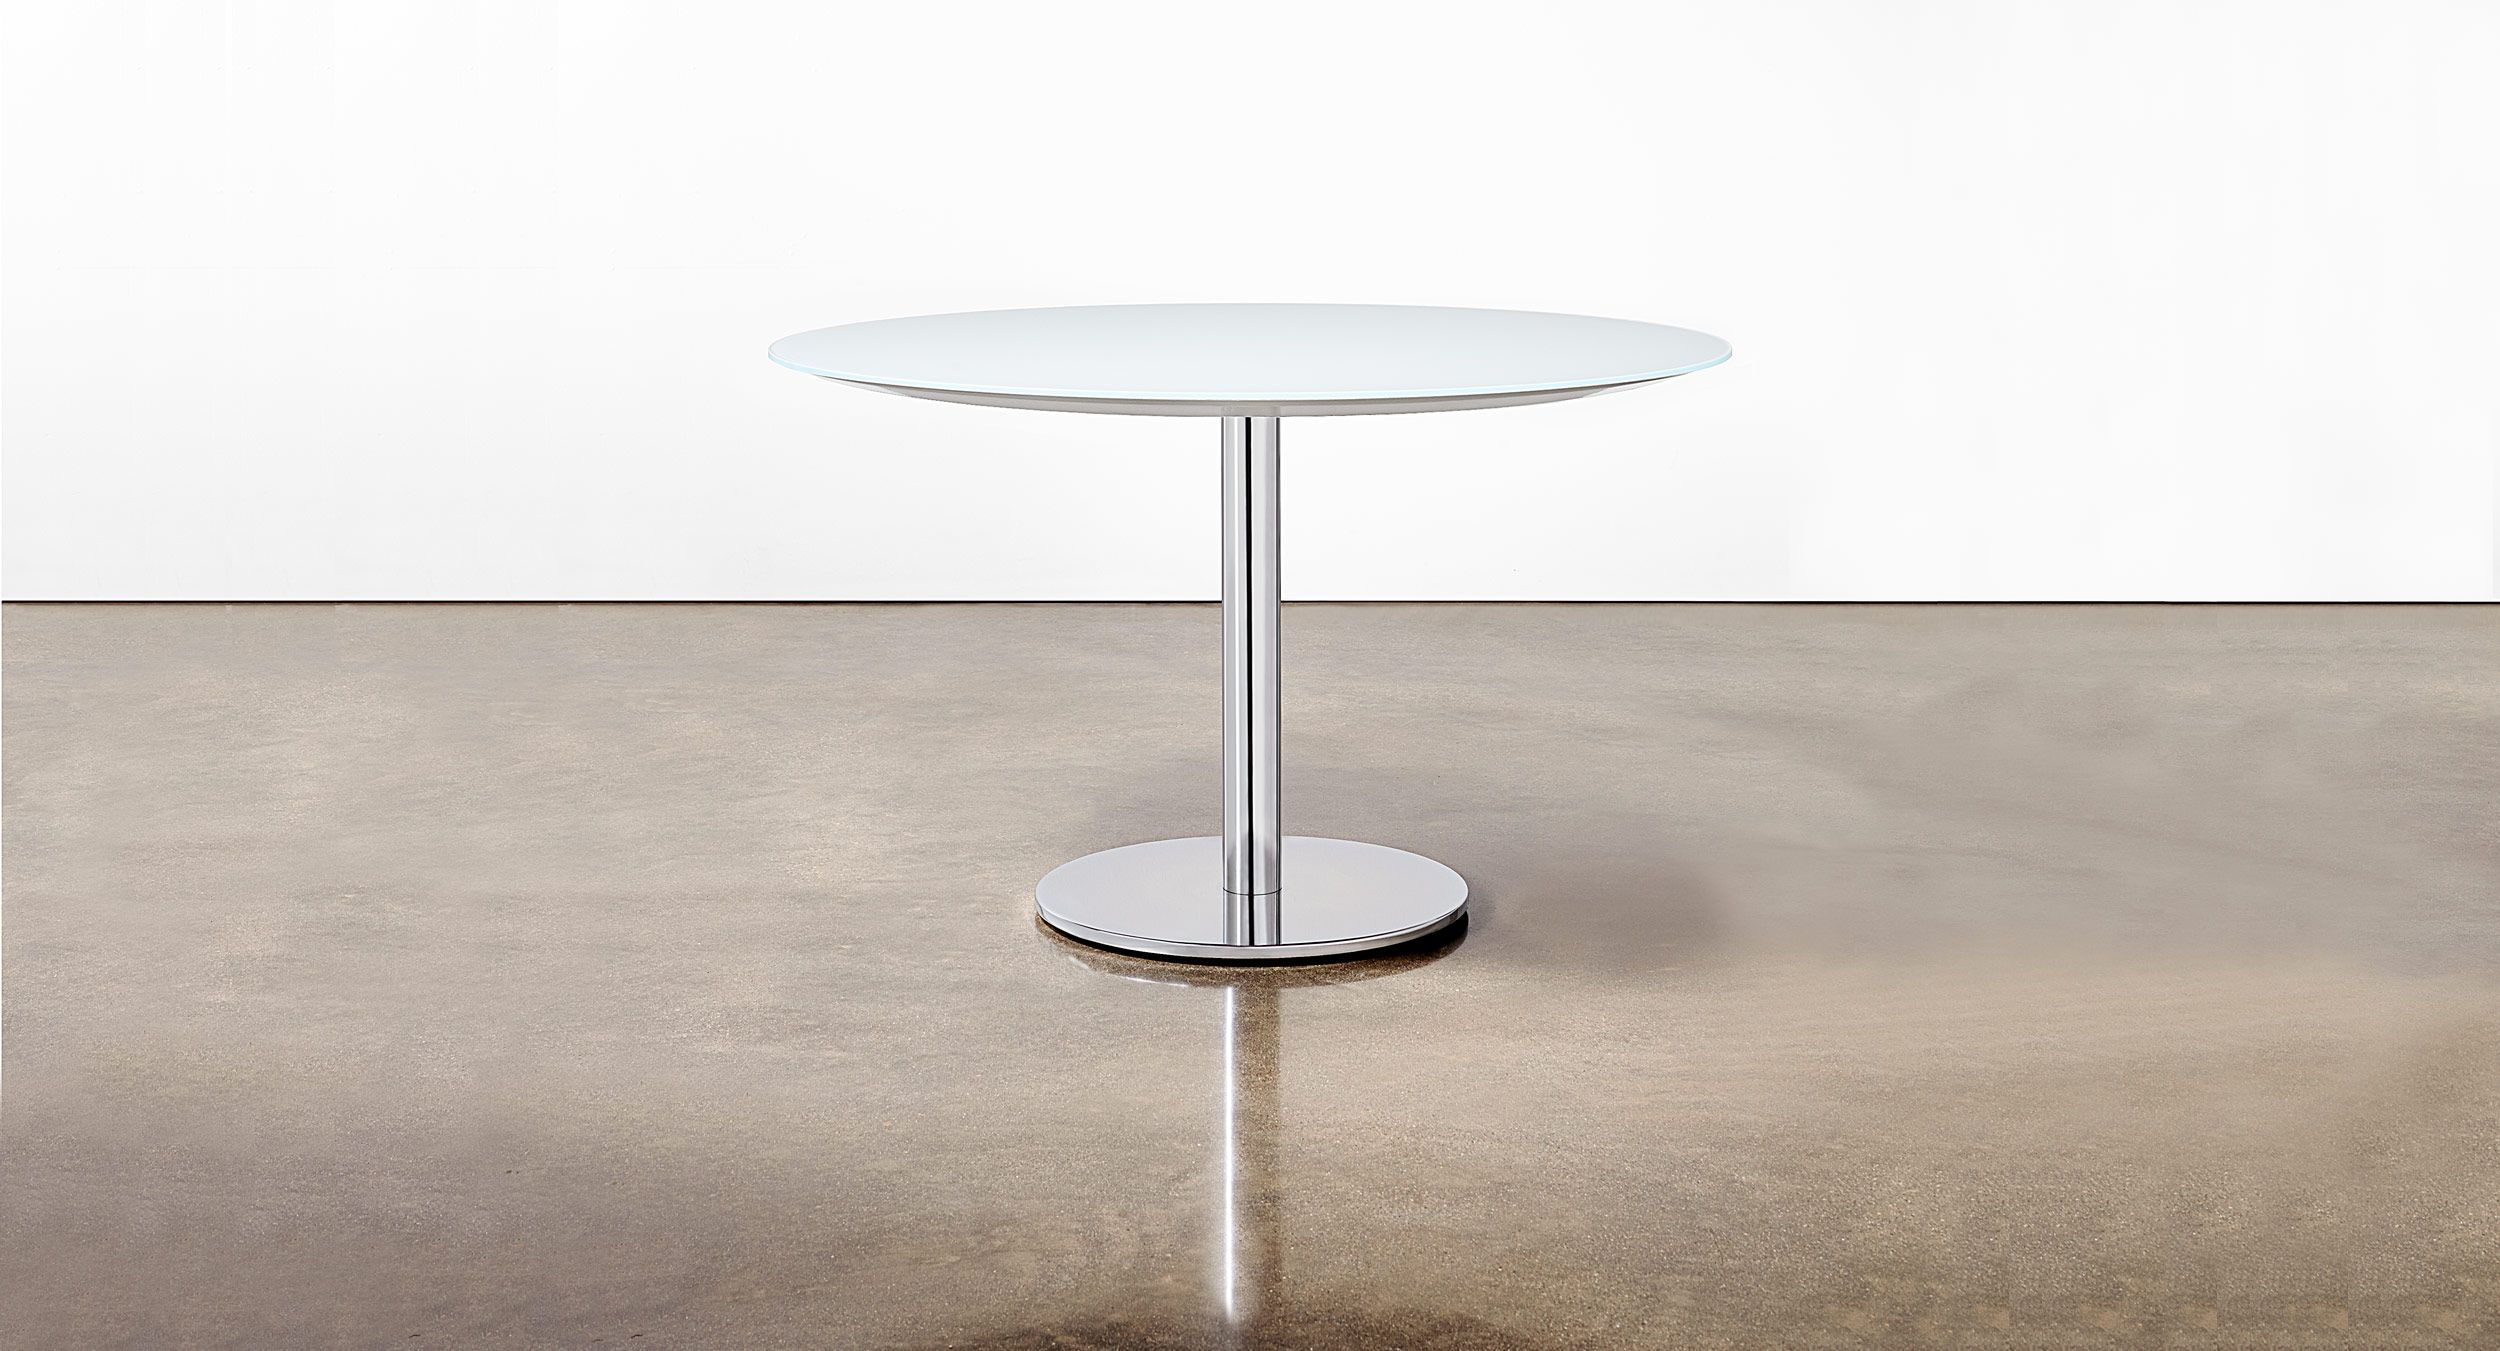 Glass table with Disc base